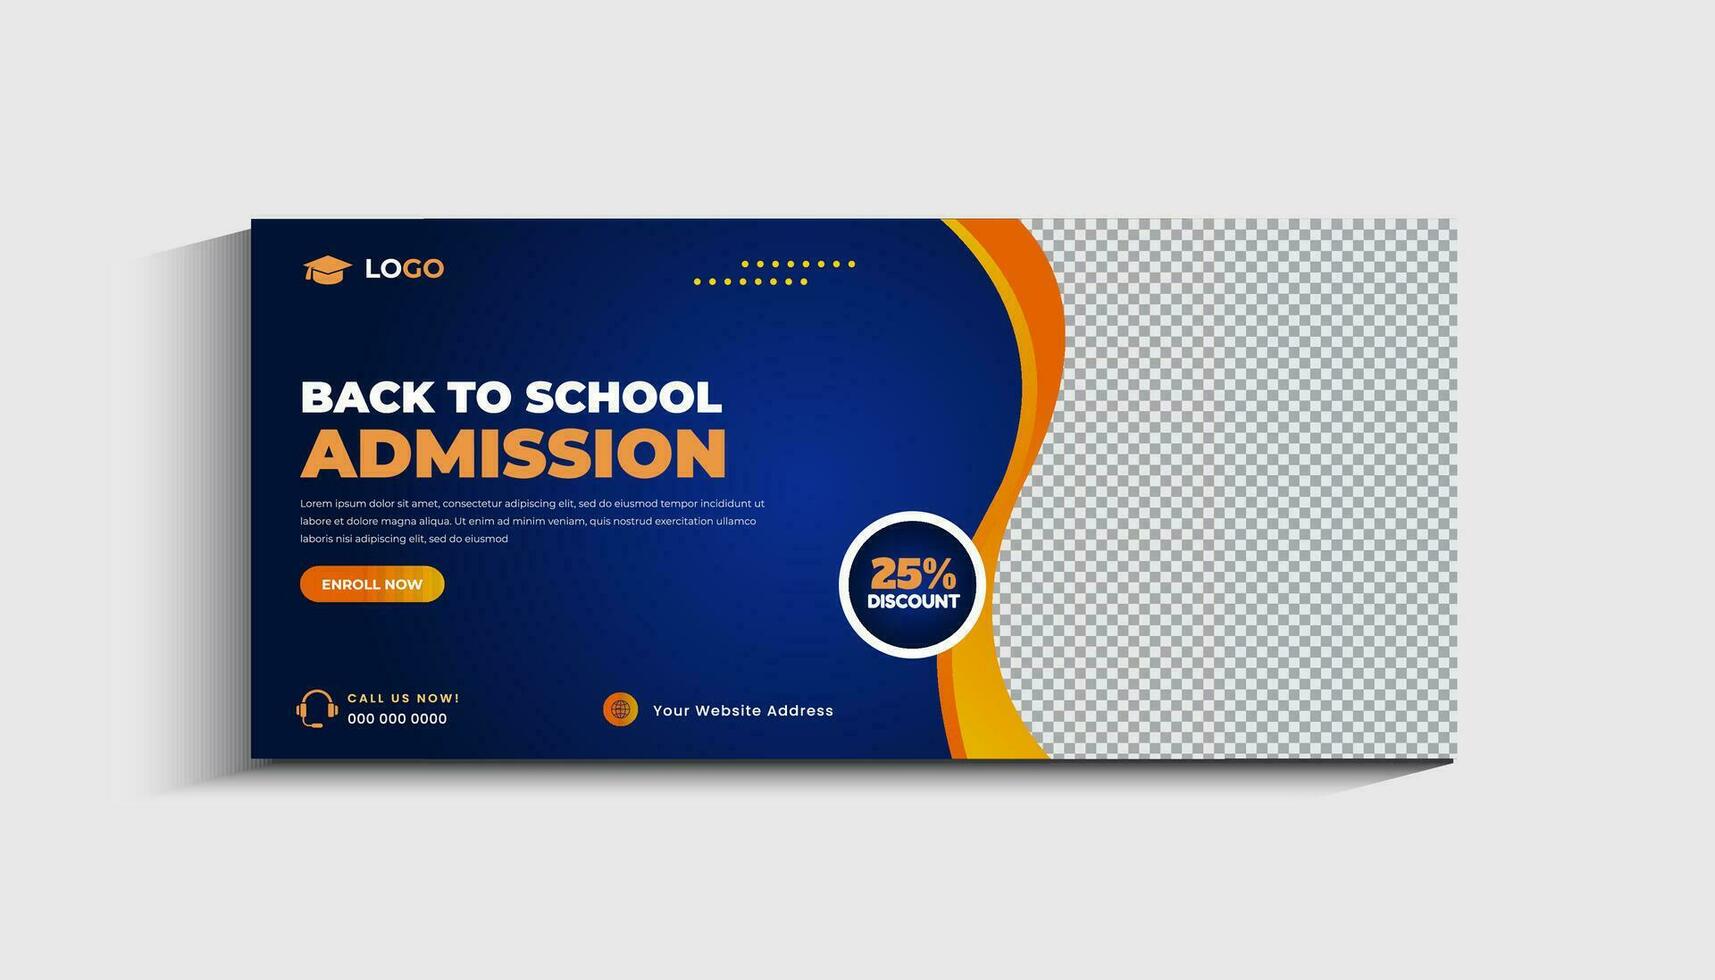 School Admission or back to school Social Media cover Template Design vector